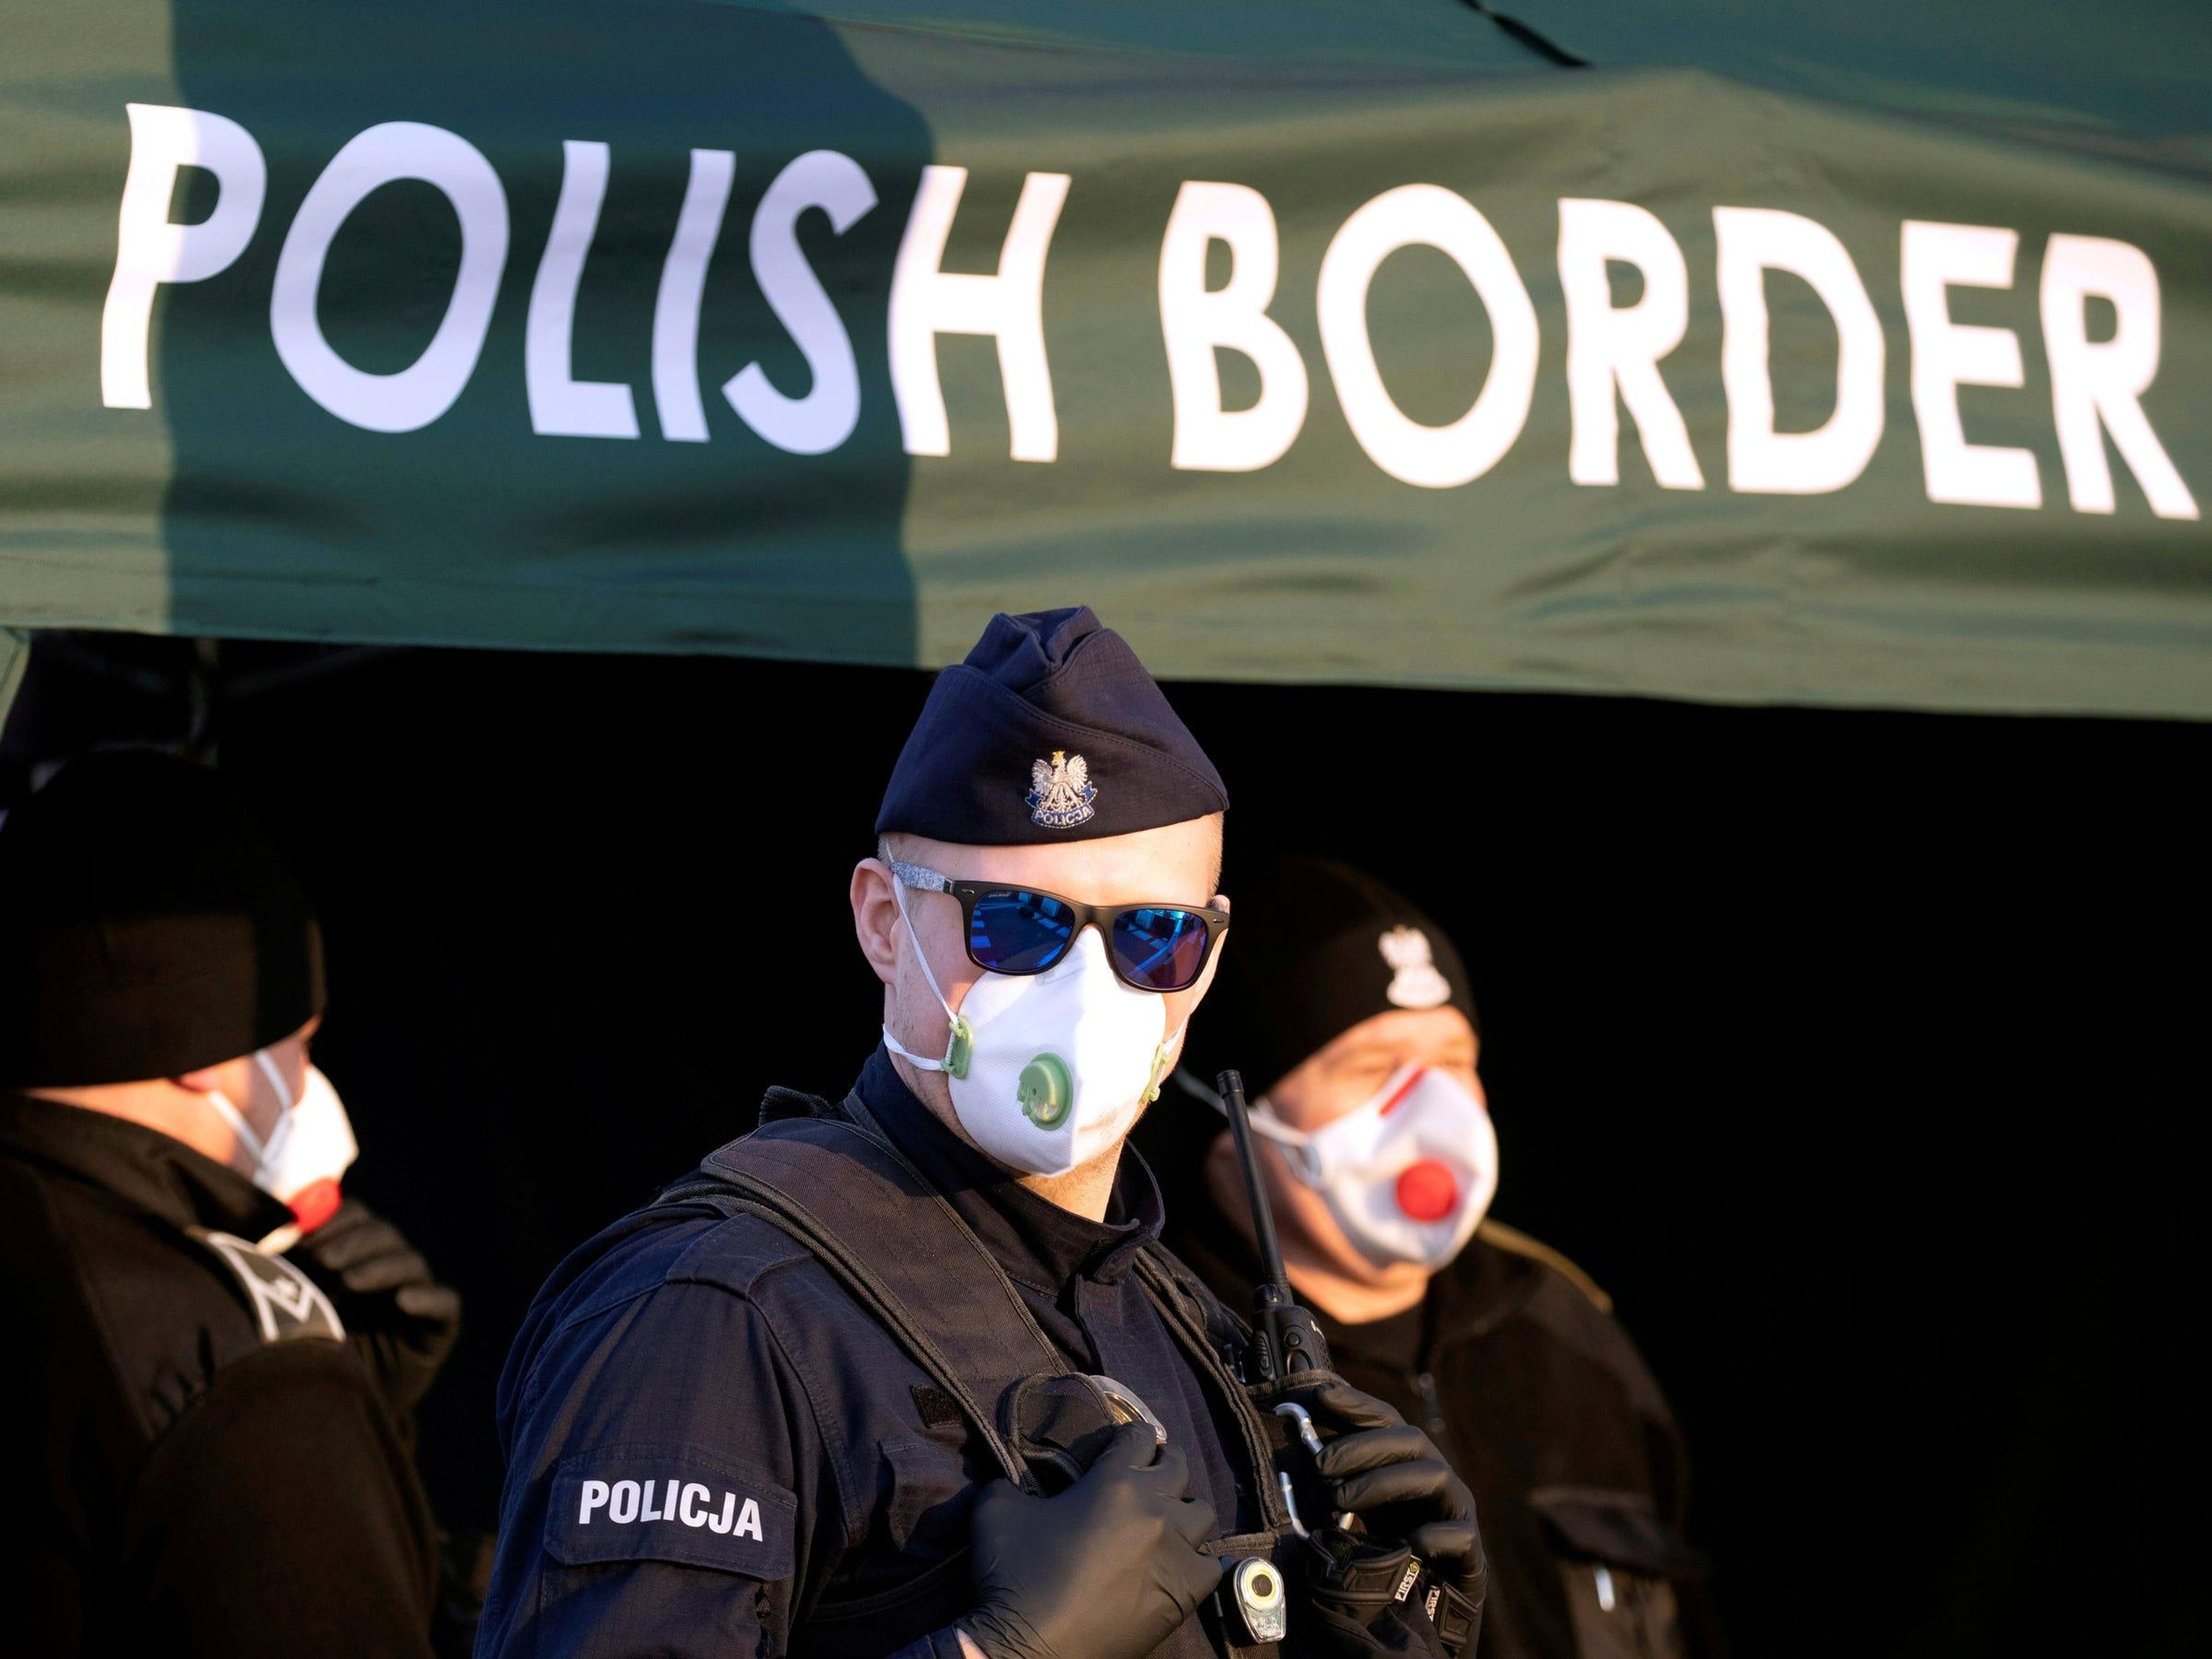 A Polish police officer, wearing a protective mask, stands at the border between Germany and Poland on March 23, during coronavirus disease symptoms testing for people returning to Poland.